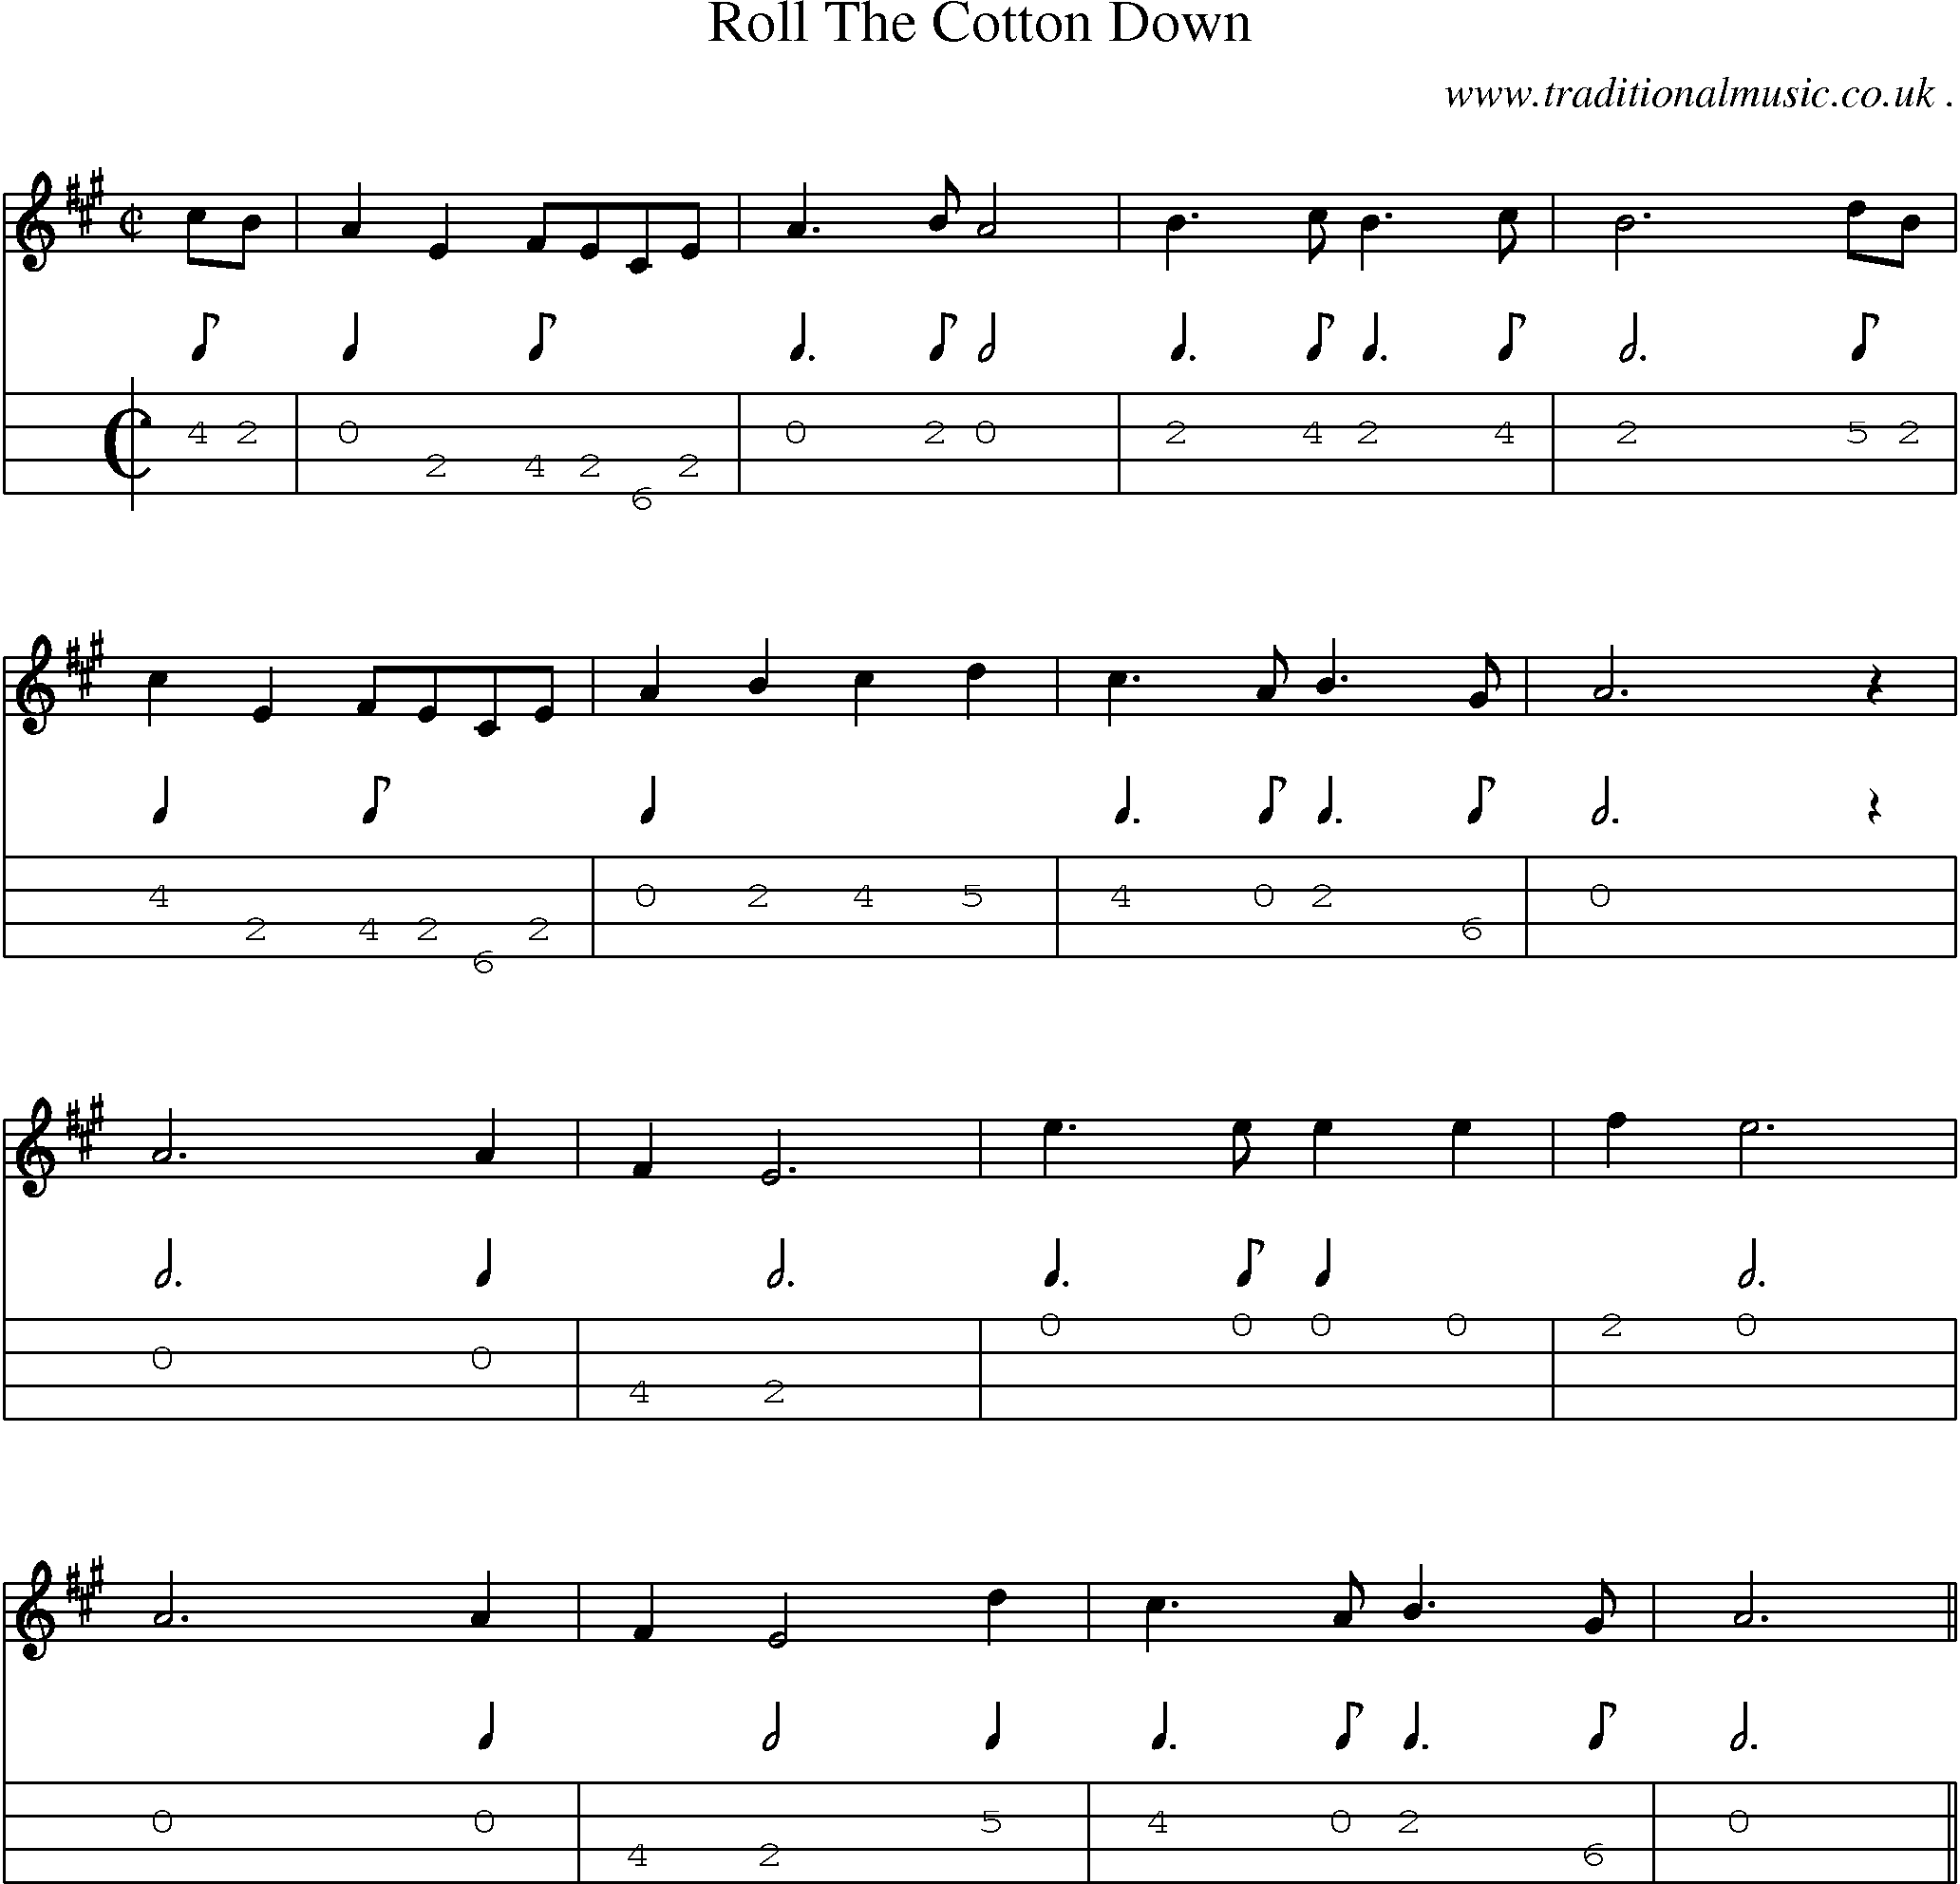 Sheet-Music and Mandolin Tabs for Roll The Cotton Down